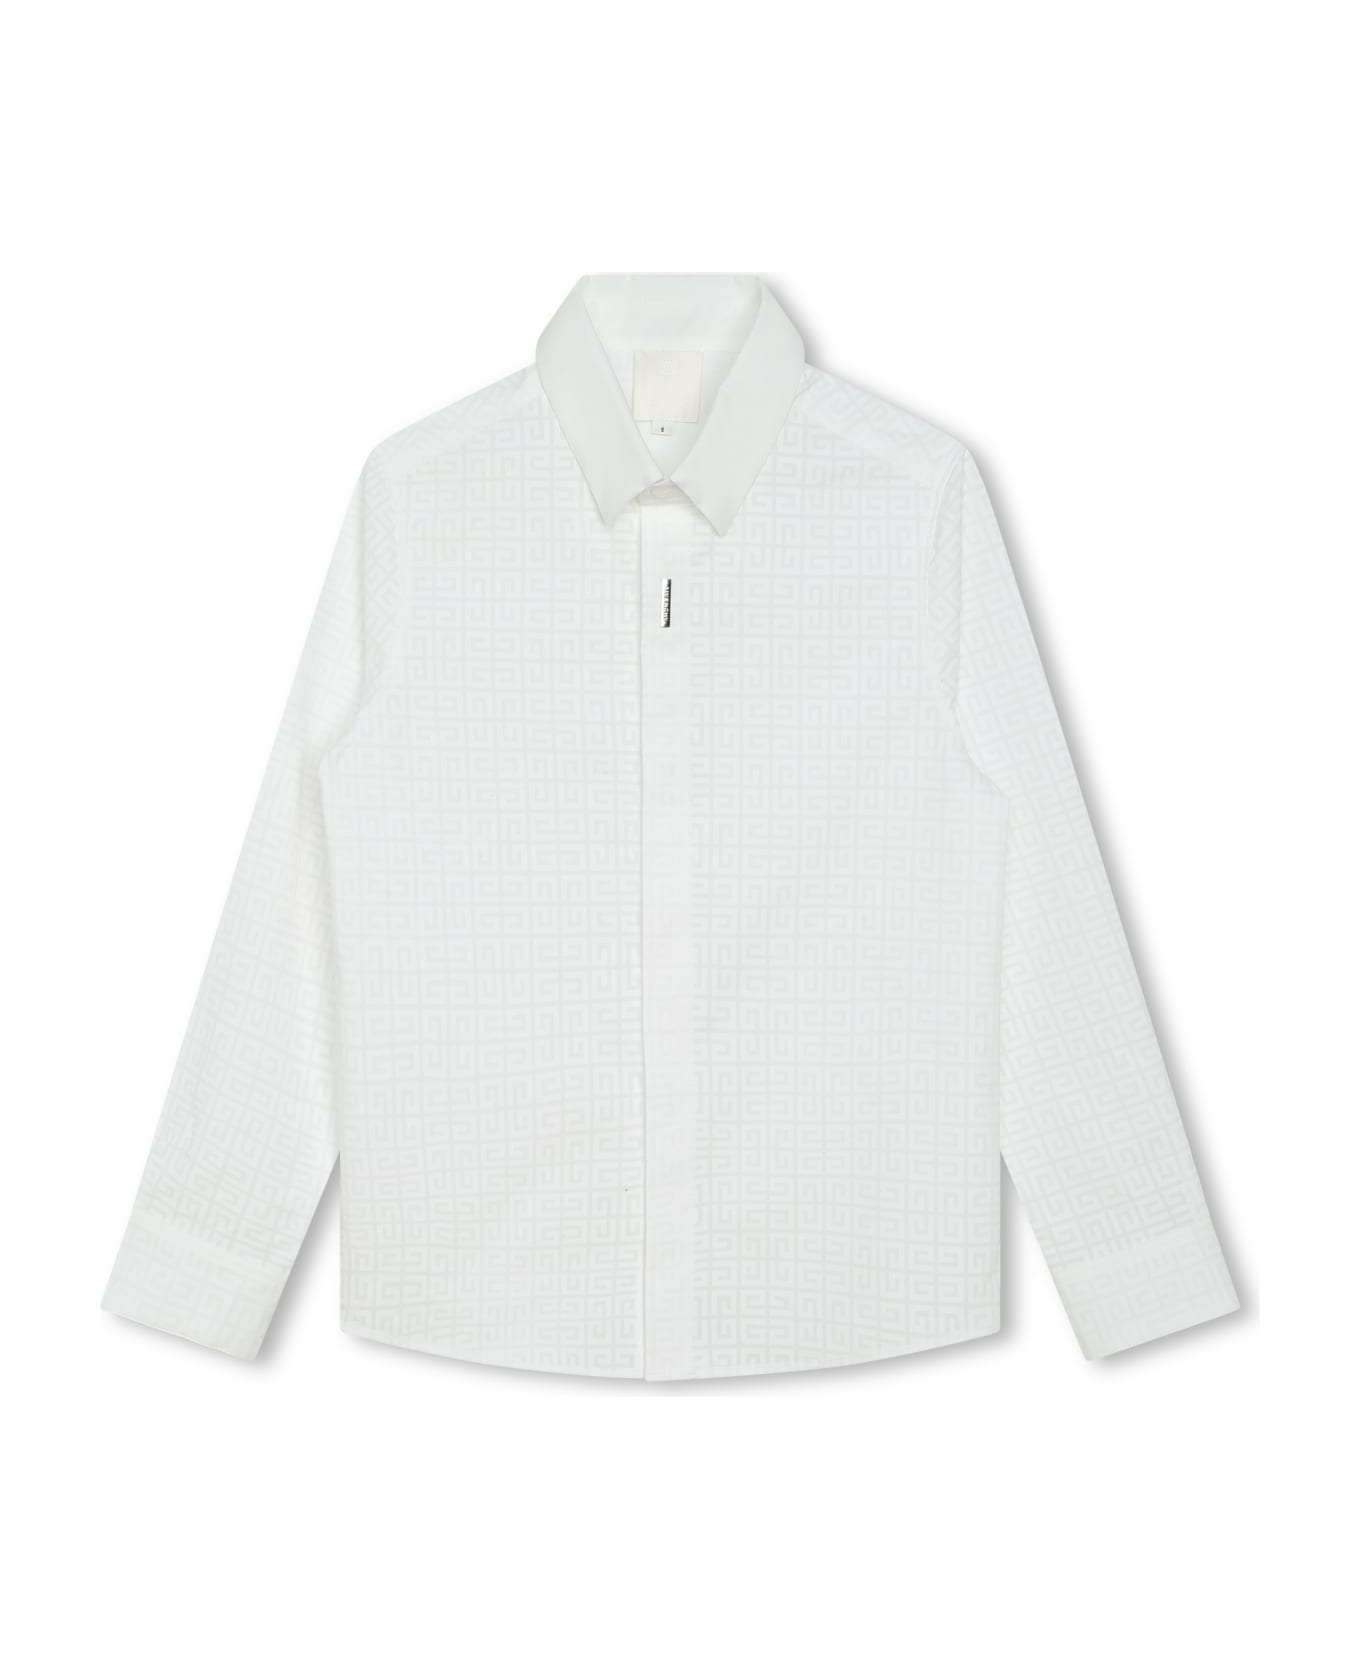 Givenchy slides Shirt With 4g Motif - White